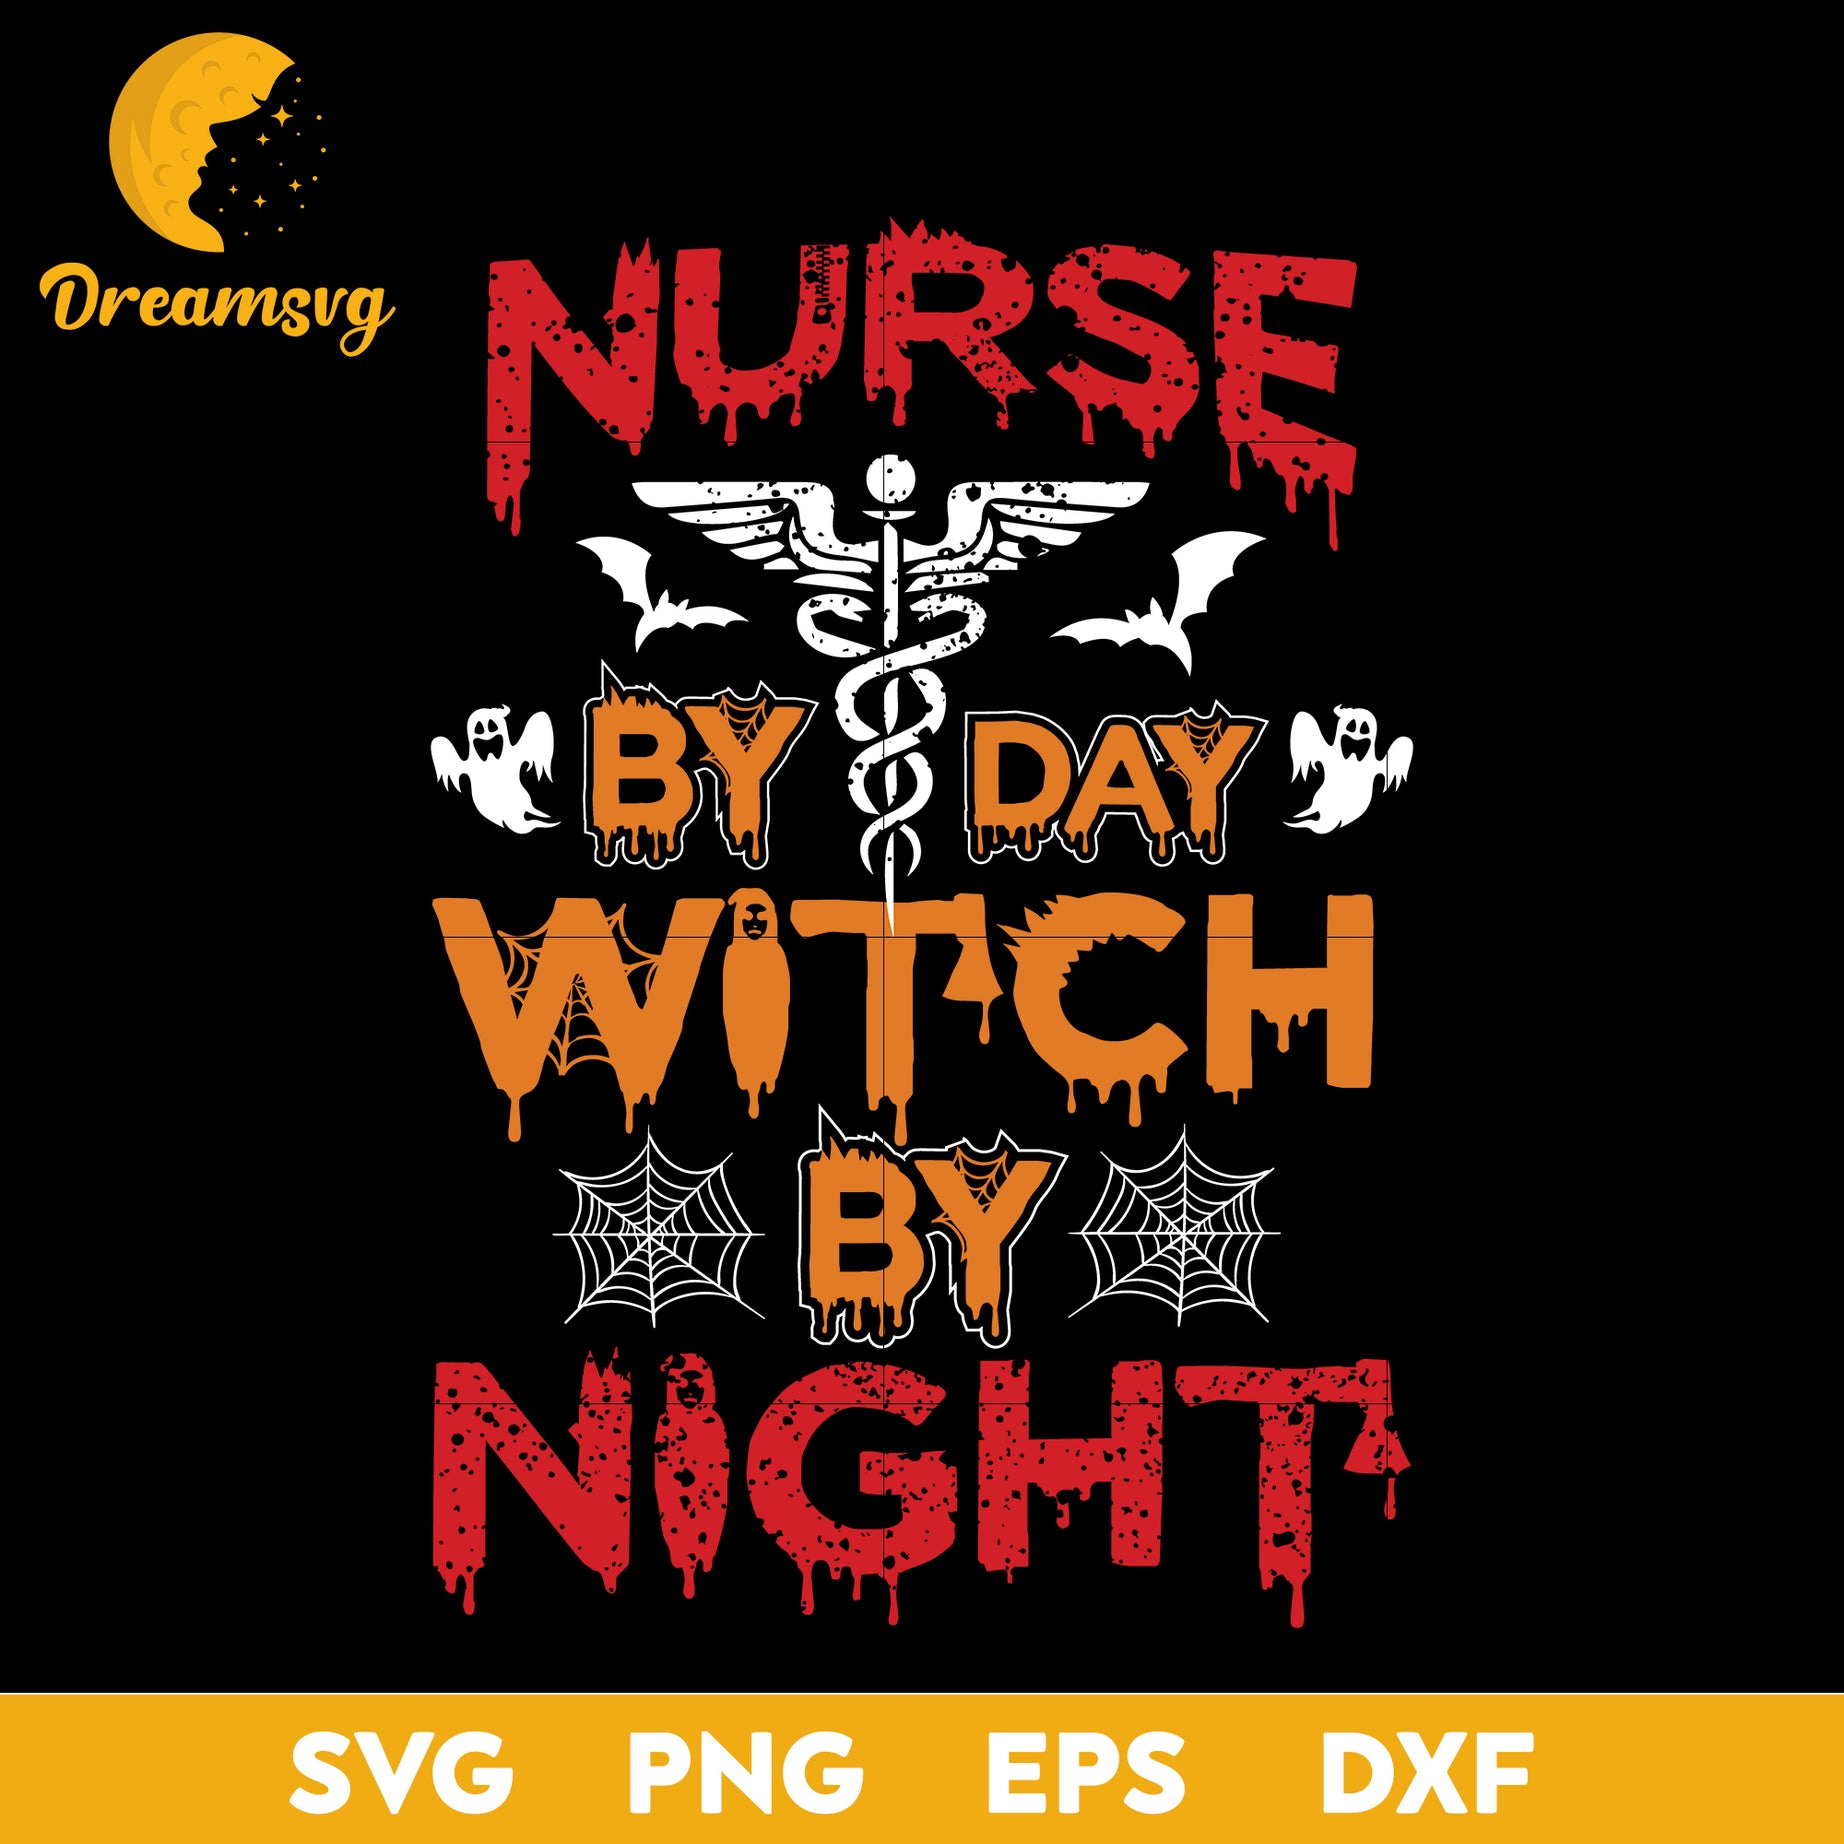 Nurse by day witch by night svg, Halloween svg, png, dxf, eps digital file.